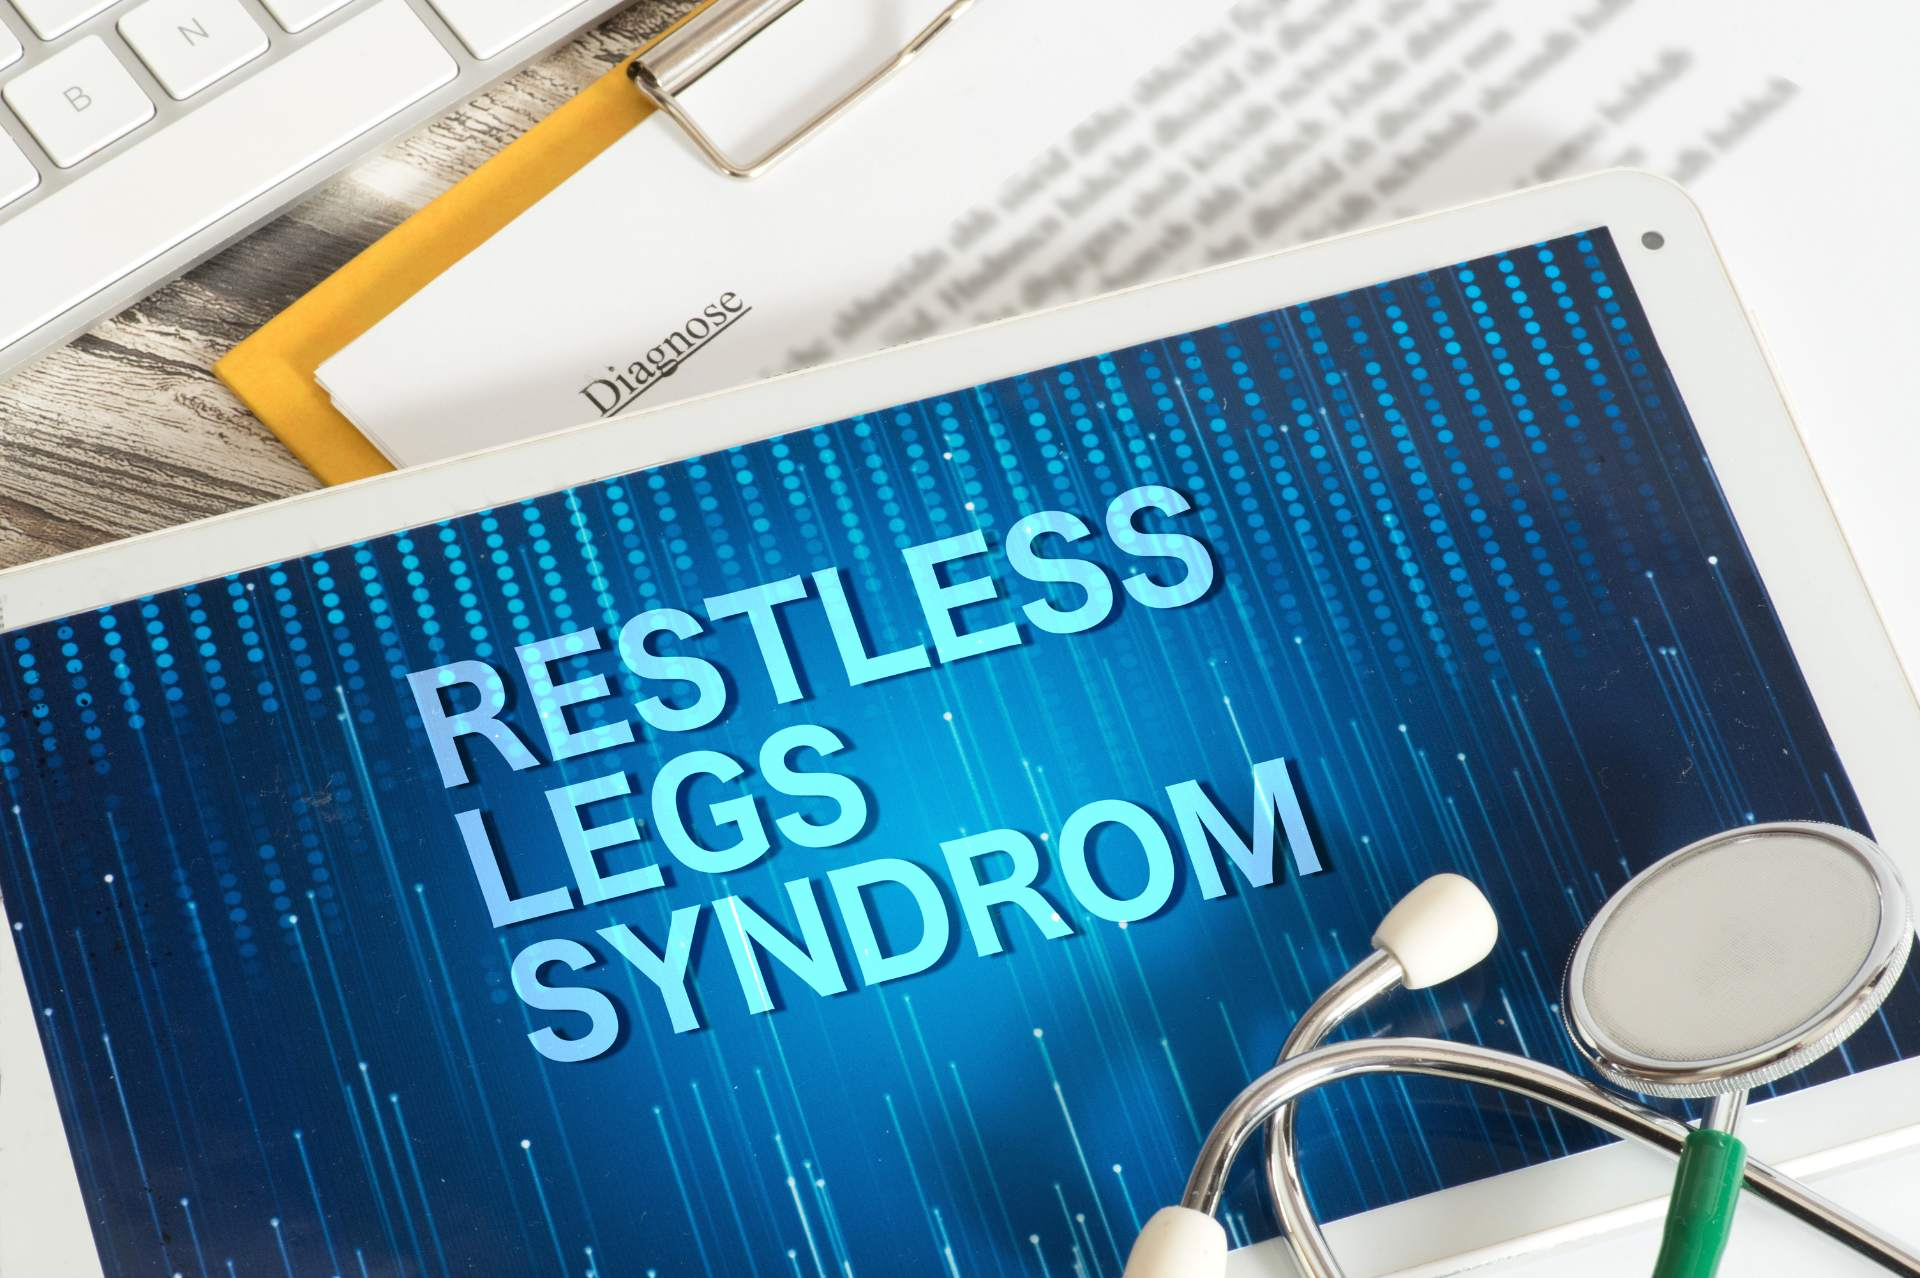 Restless Leg Syndrome: Treatment, Symptoms and Causes of RLS